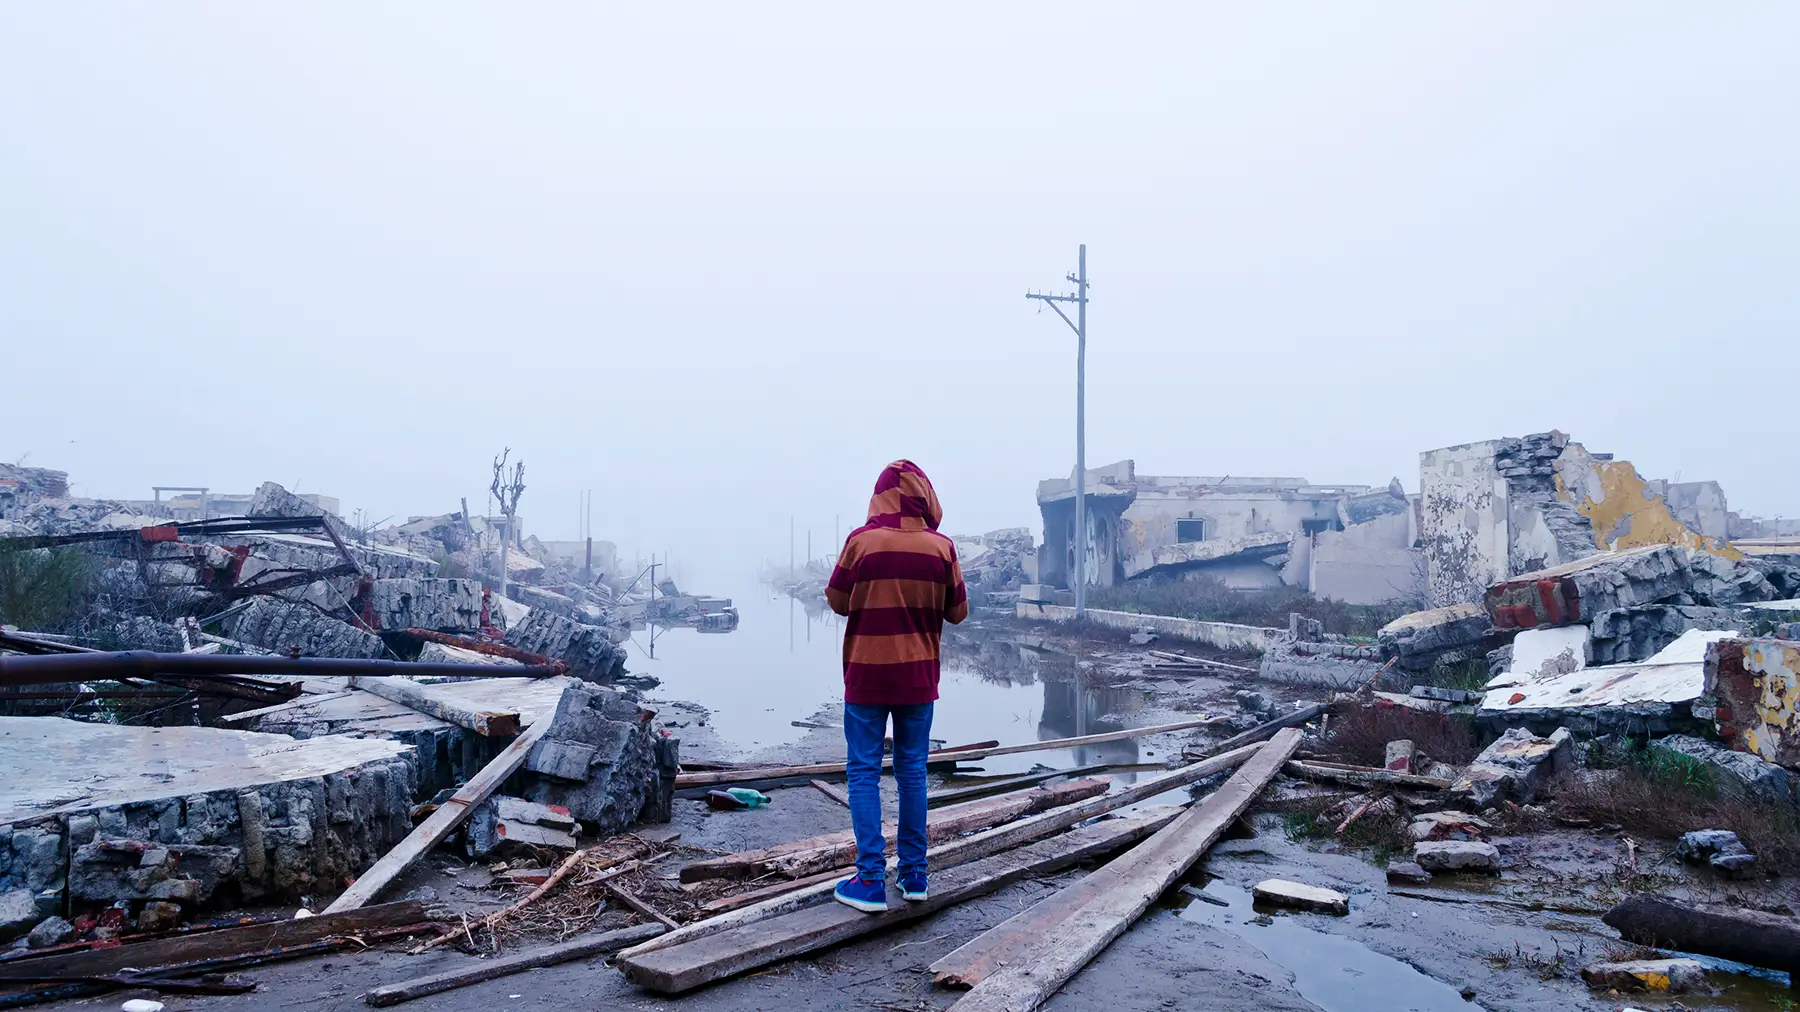 Young Argentinian boy stands in remains of town after a flood